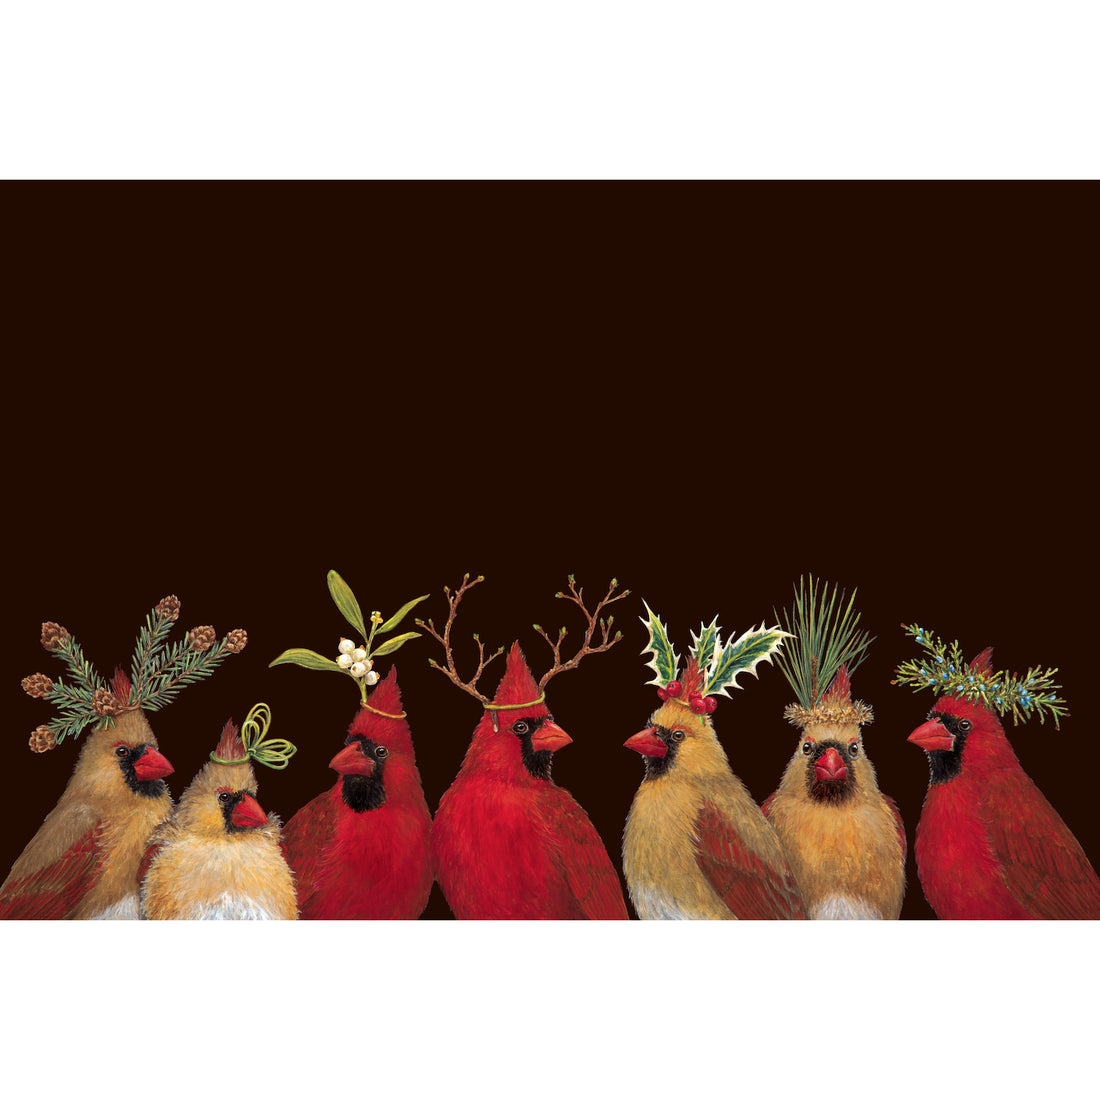 Paper placemat with red cardinals with botanical hats and black background